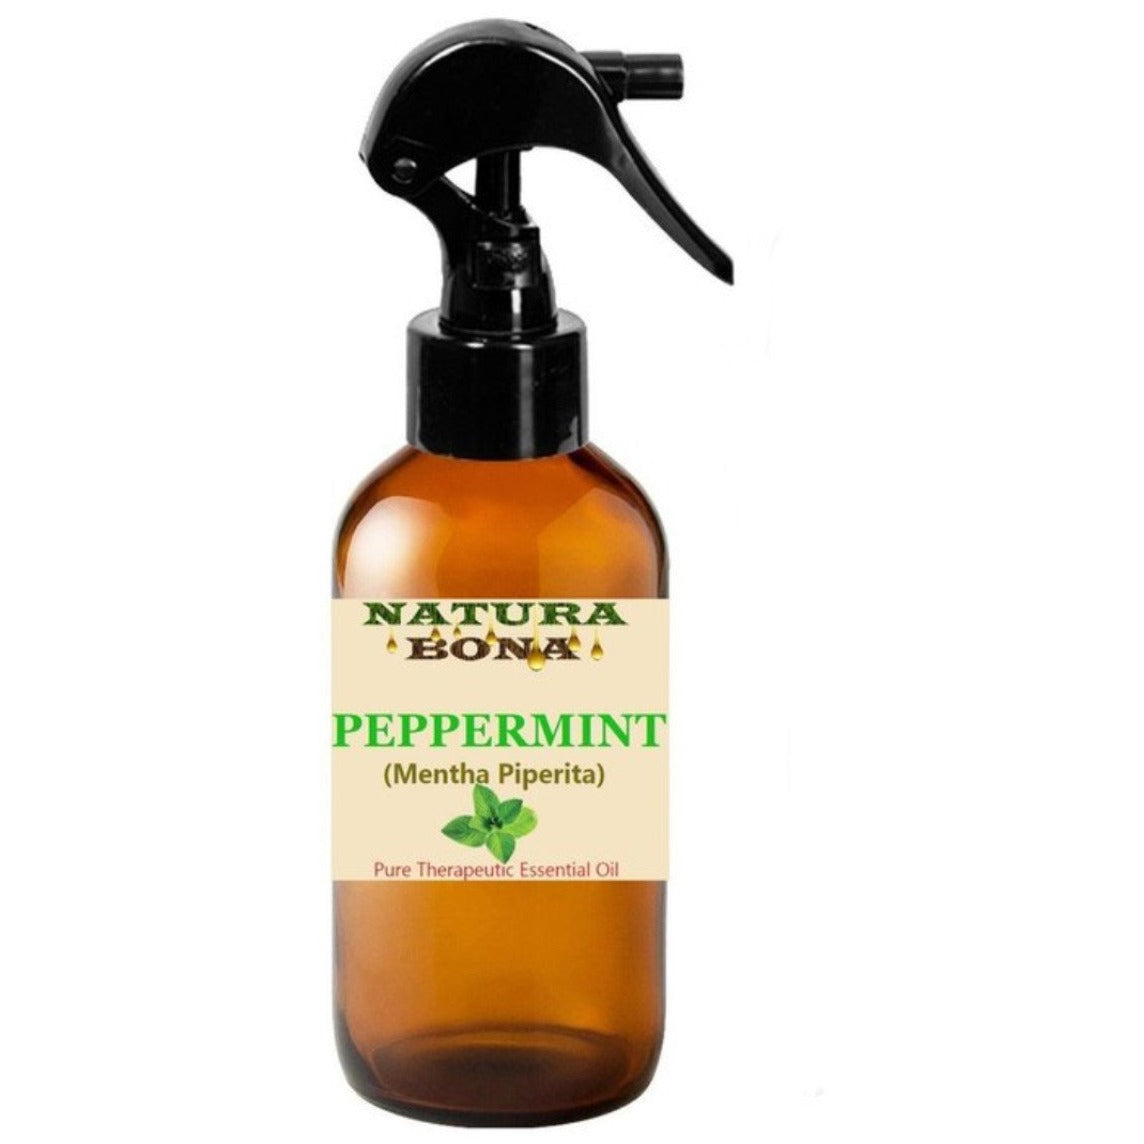 peppermint oil for rats amazon